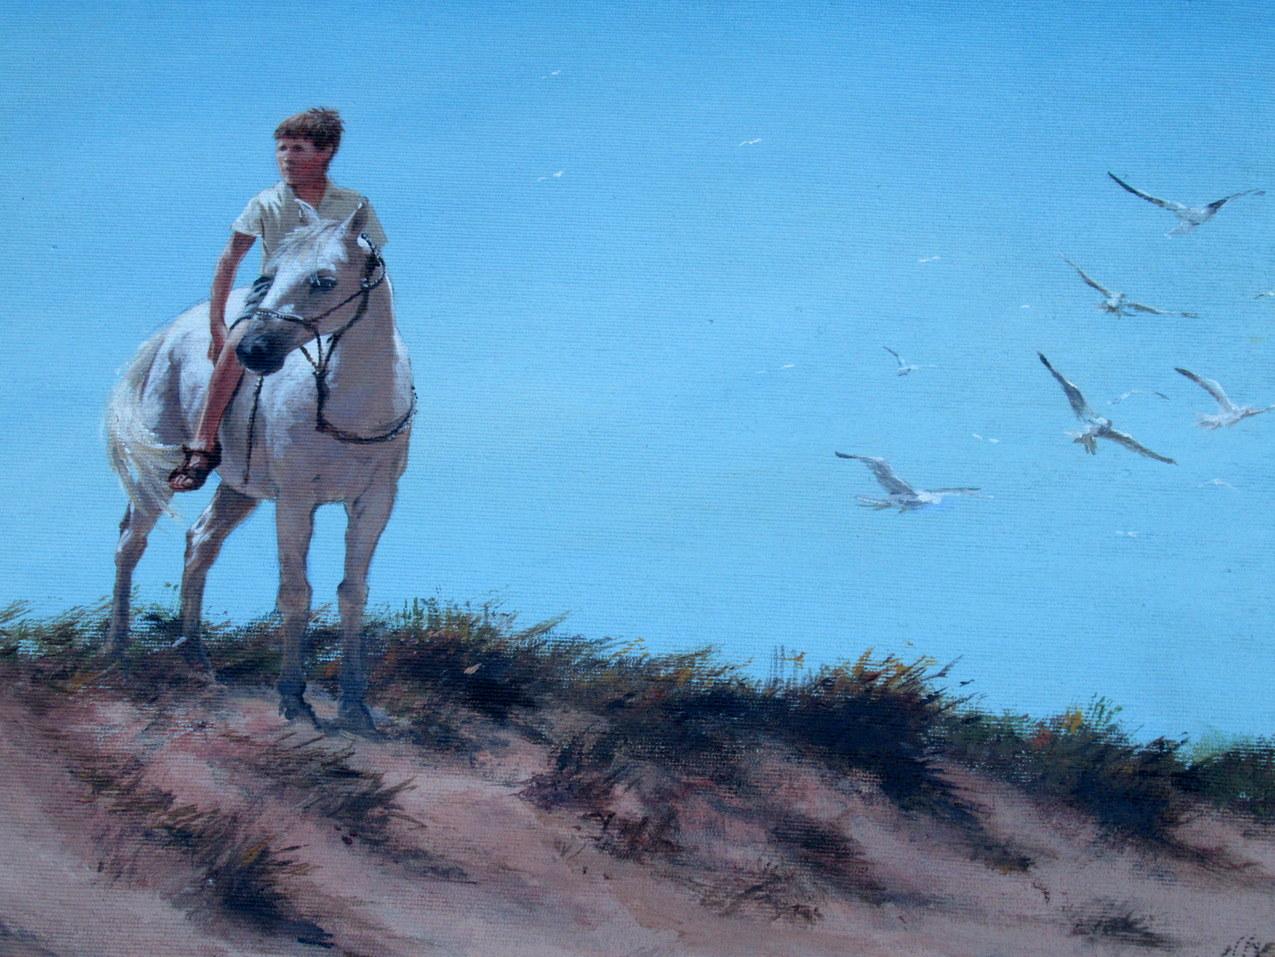 Stunning Irish oil on canvas framed painting painted during the last quarter of the 20th century, by Ted Jones (Irish 1952-2017). 

This wonderful depicts a young Gentleman on horseback in sandy dunes with flying Seagulls in the distance. This